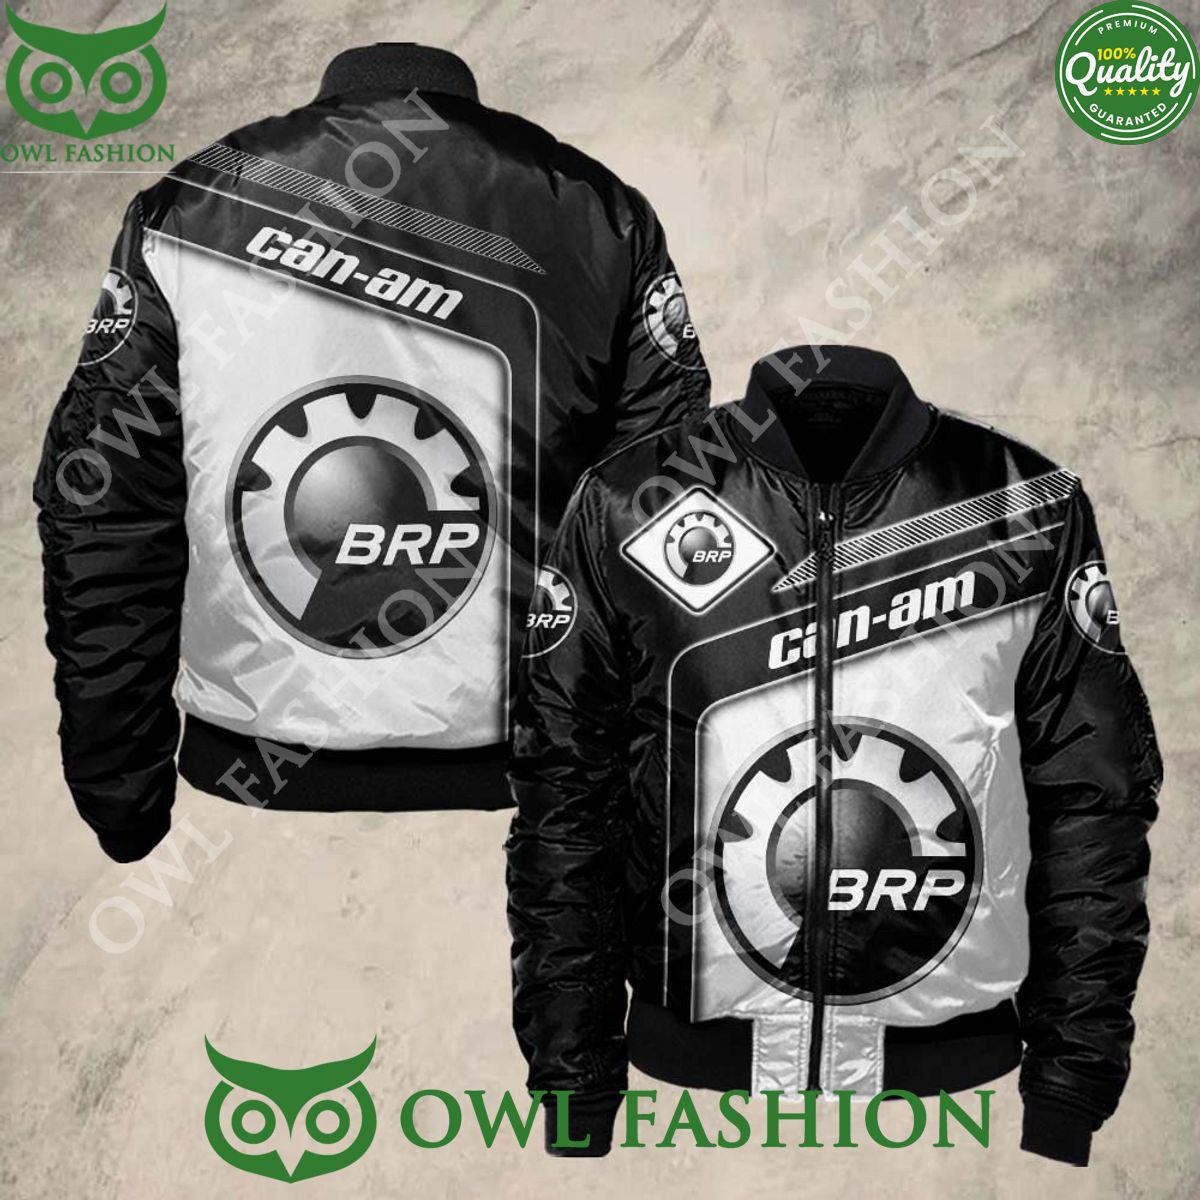 Trending BRP Can am Car Sport Bomber Jacket Stand easy bro